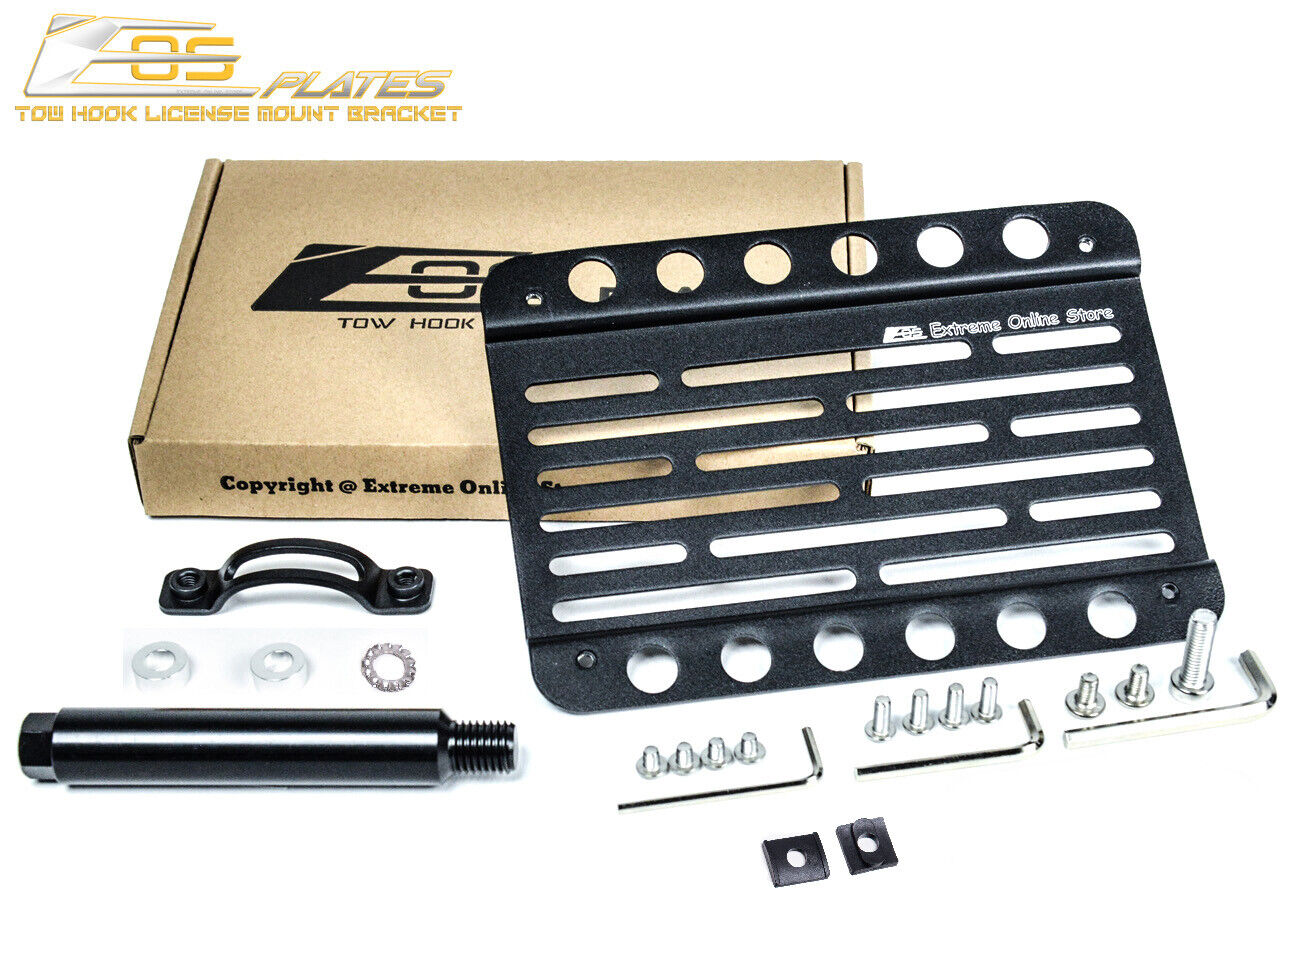 EOS Plate For 06-11 MB R171 SLK-Class Front Bumper TowHook License Mount Bracket